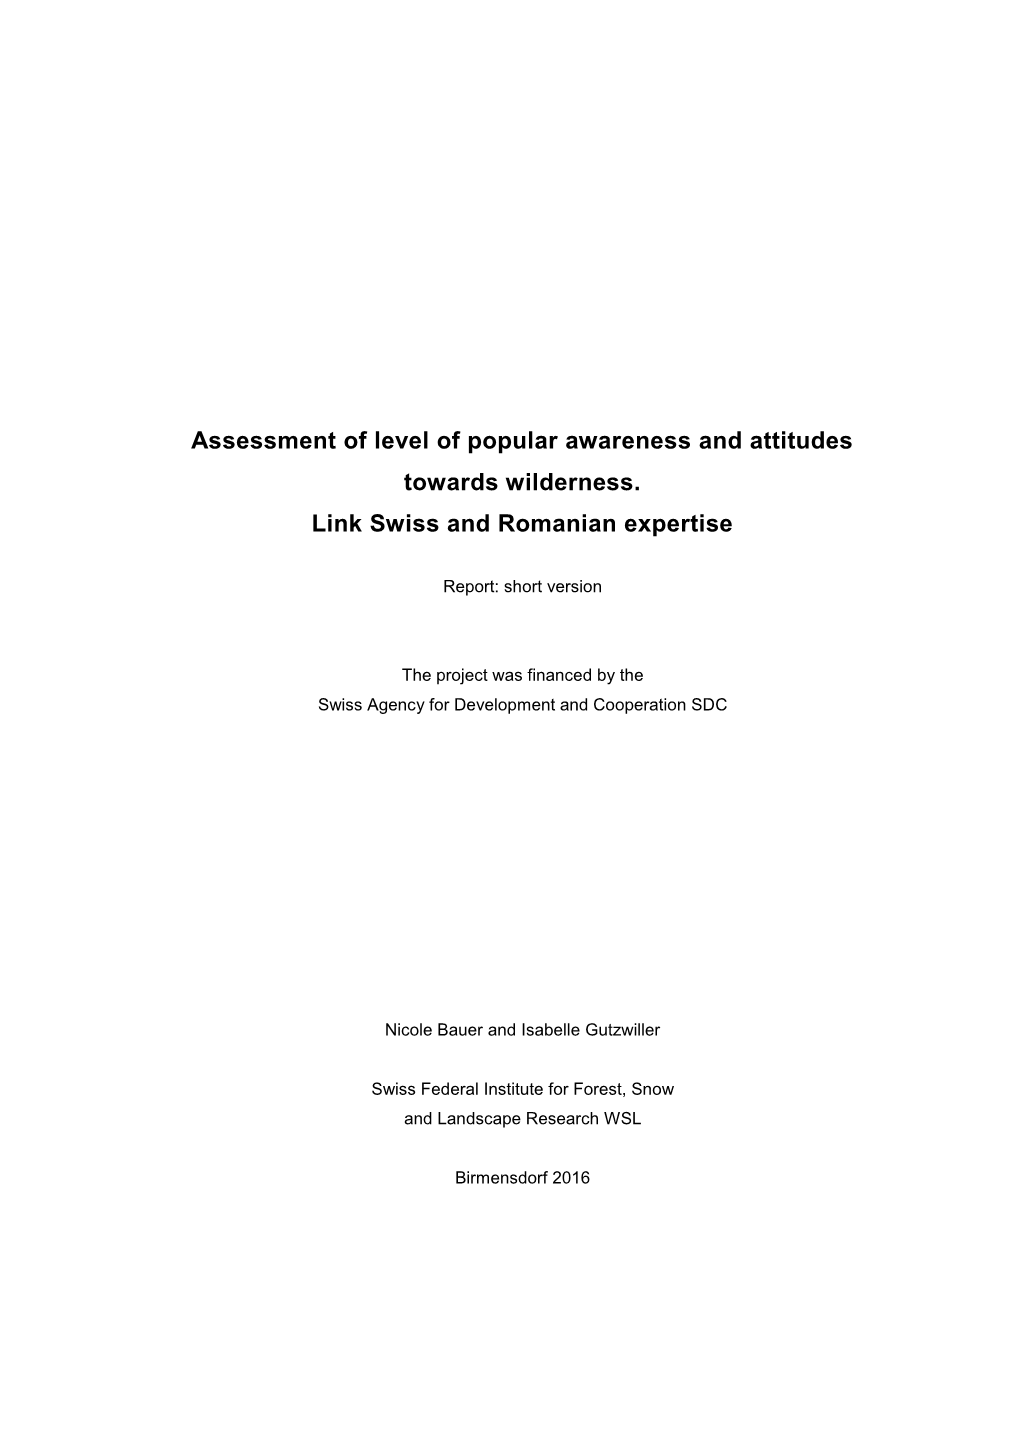 Assessment of Level of Popular Awareness and Attitudes Towards Wilderness